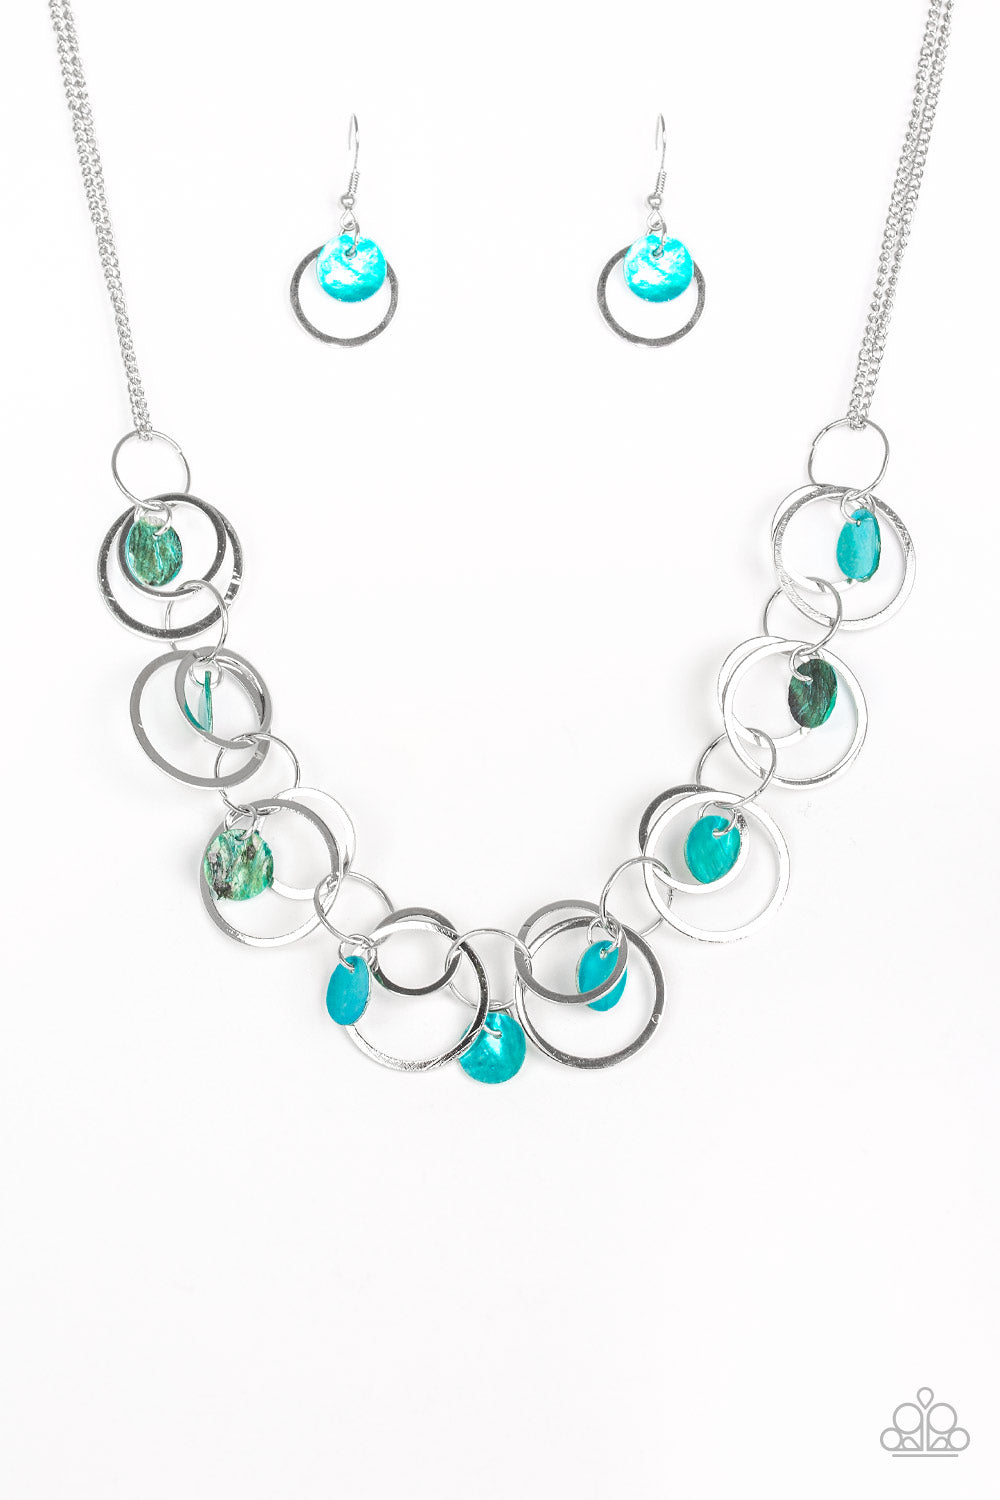 A HOT SHELL-ER - BLUE SHELL MOTHER OF PEARL DISCS SILVER HOOPS NECKLACE